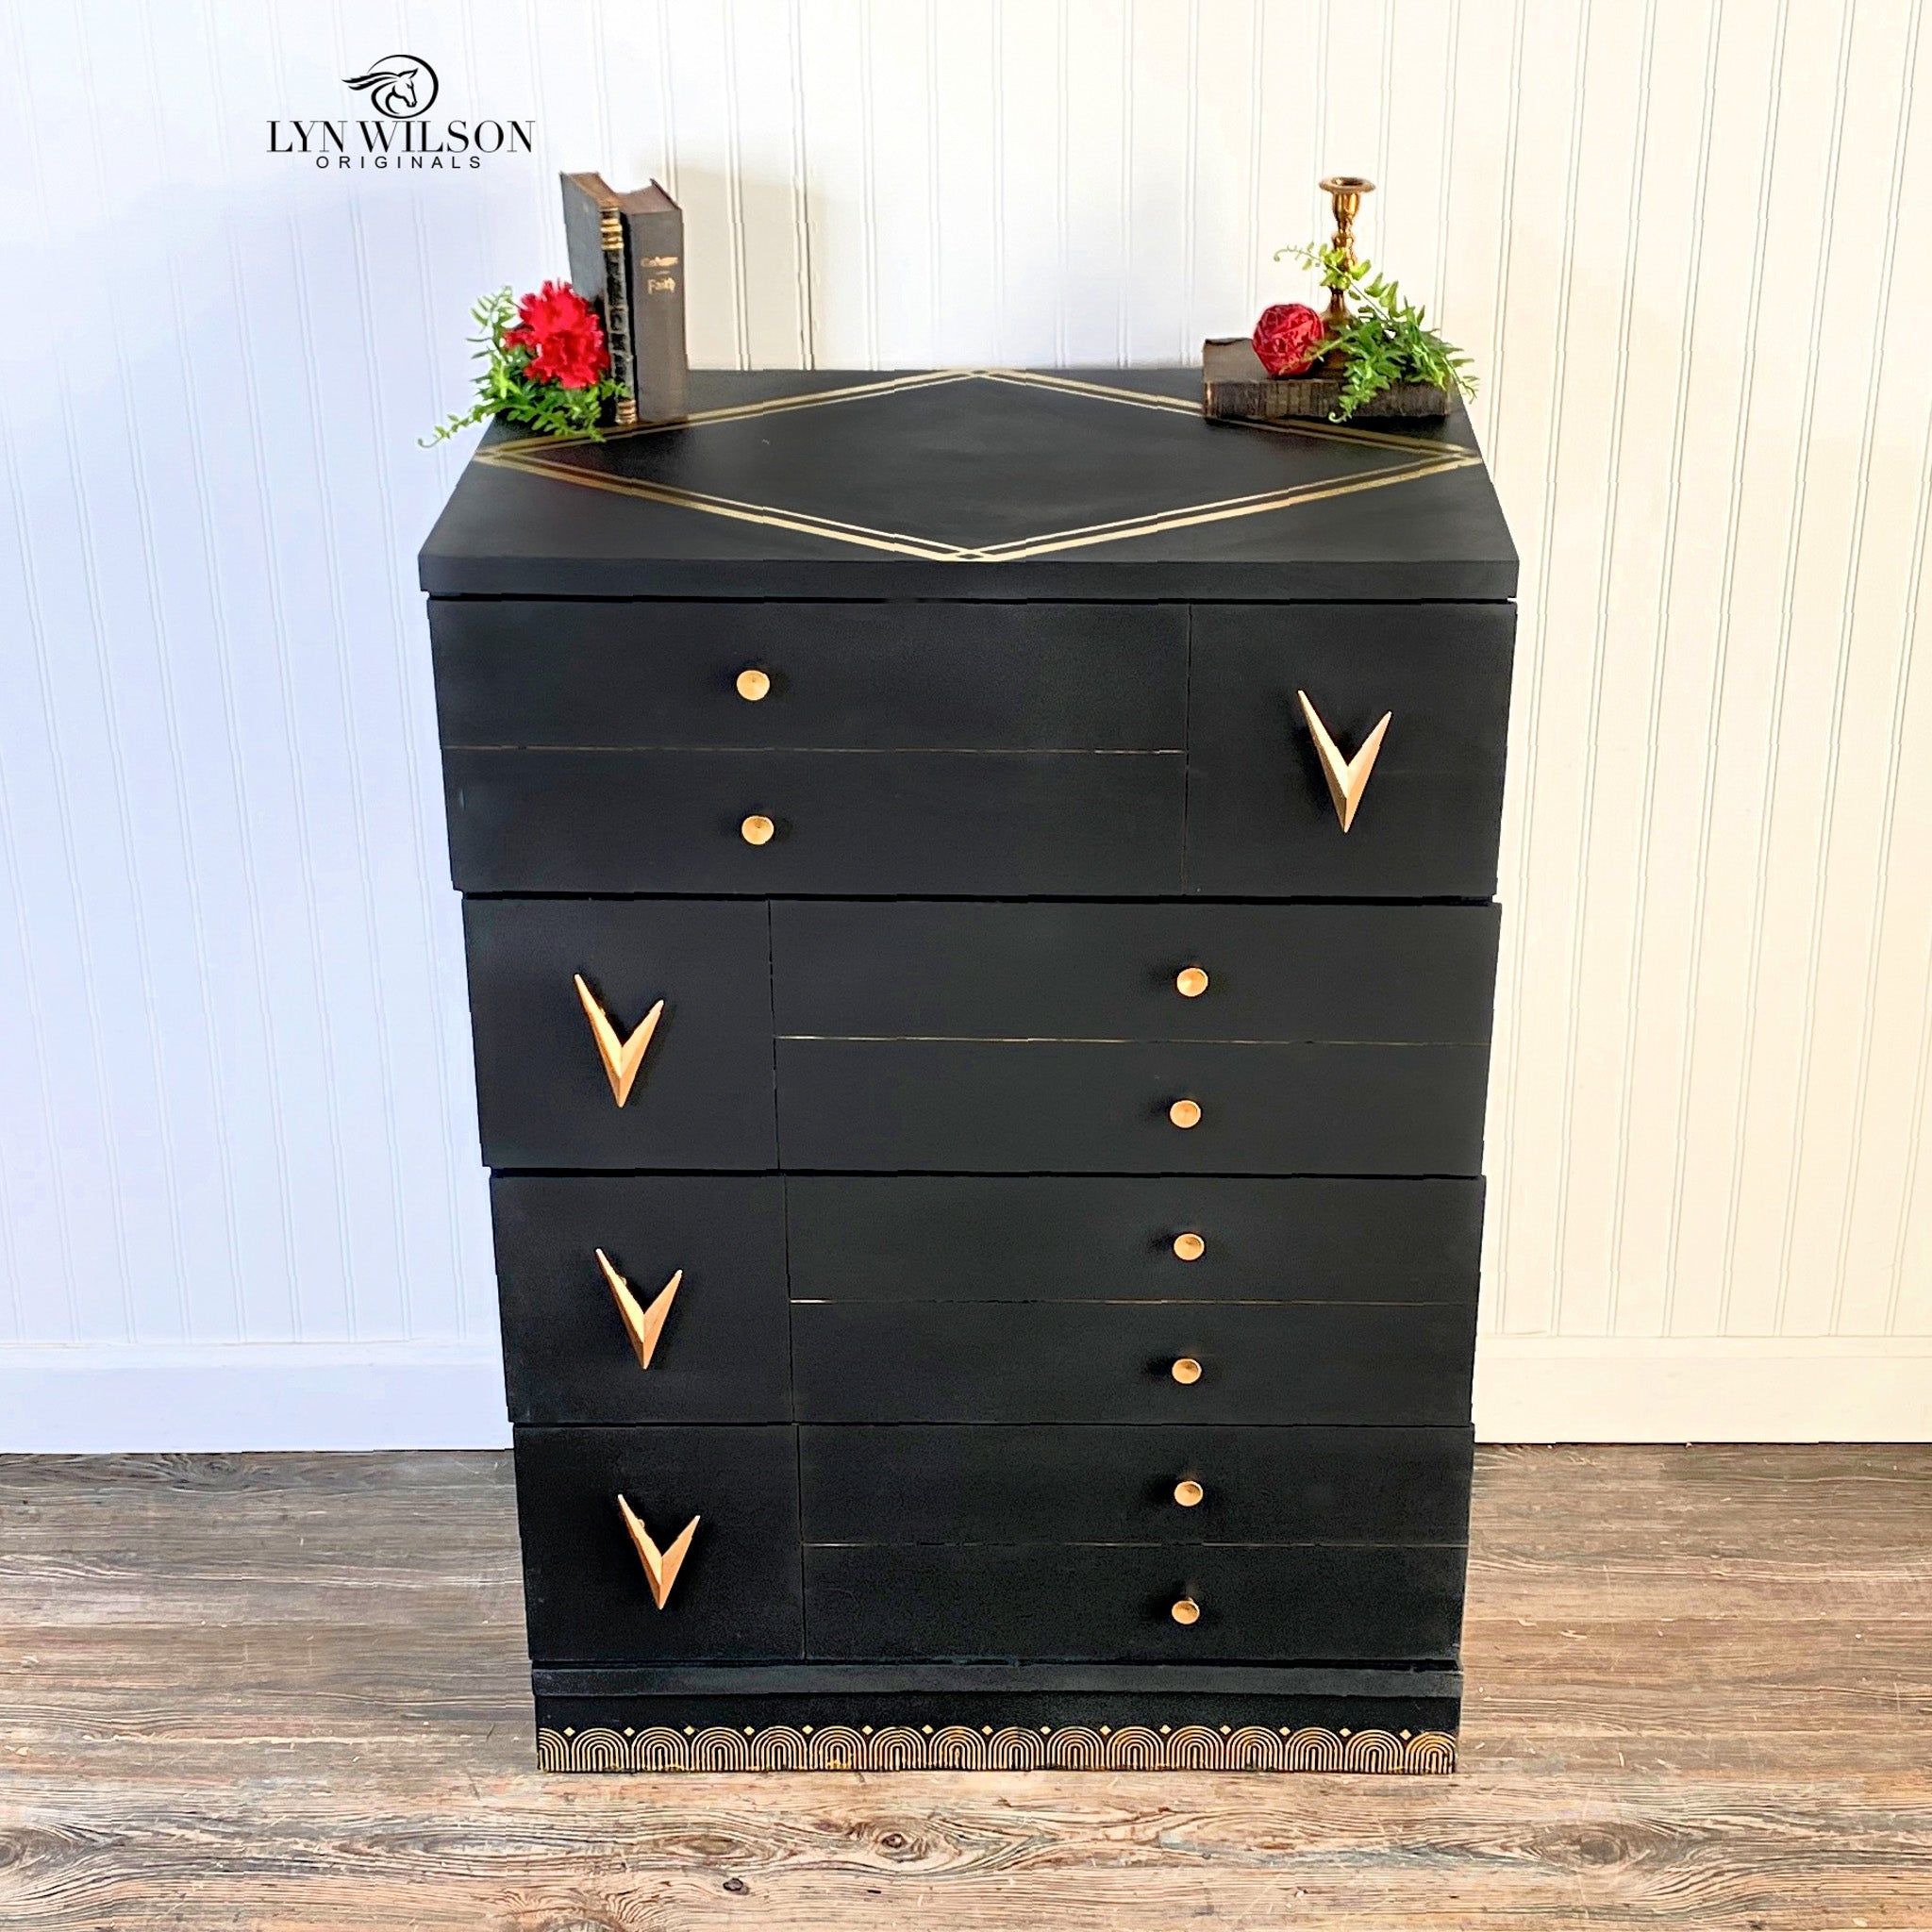 A vintage 4-drawer dresser with gold accents refurbished by Lyn Wilson Originals is painted in Dixie Belle's Midnight Sky chalk mineral paint.